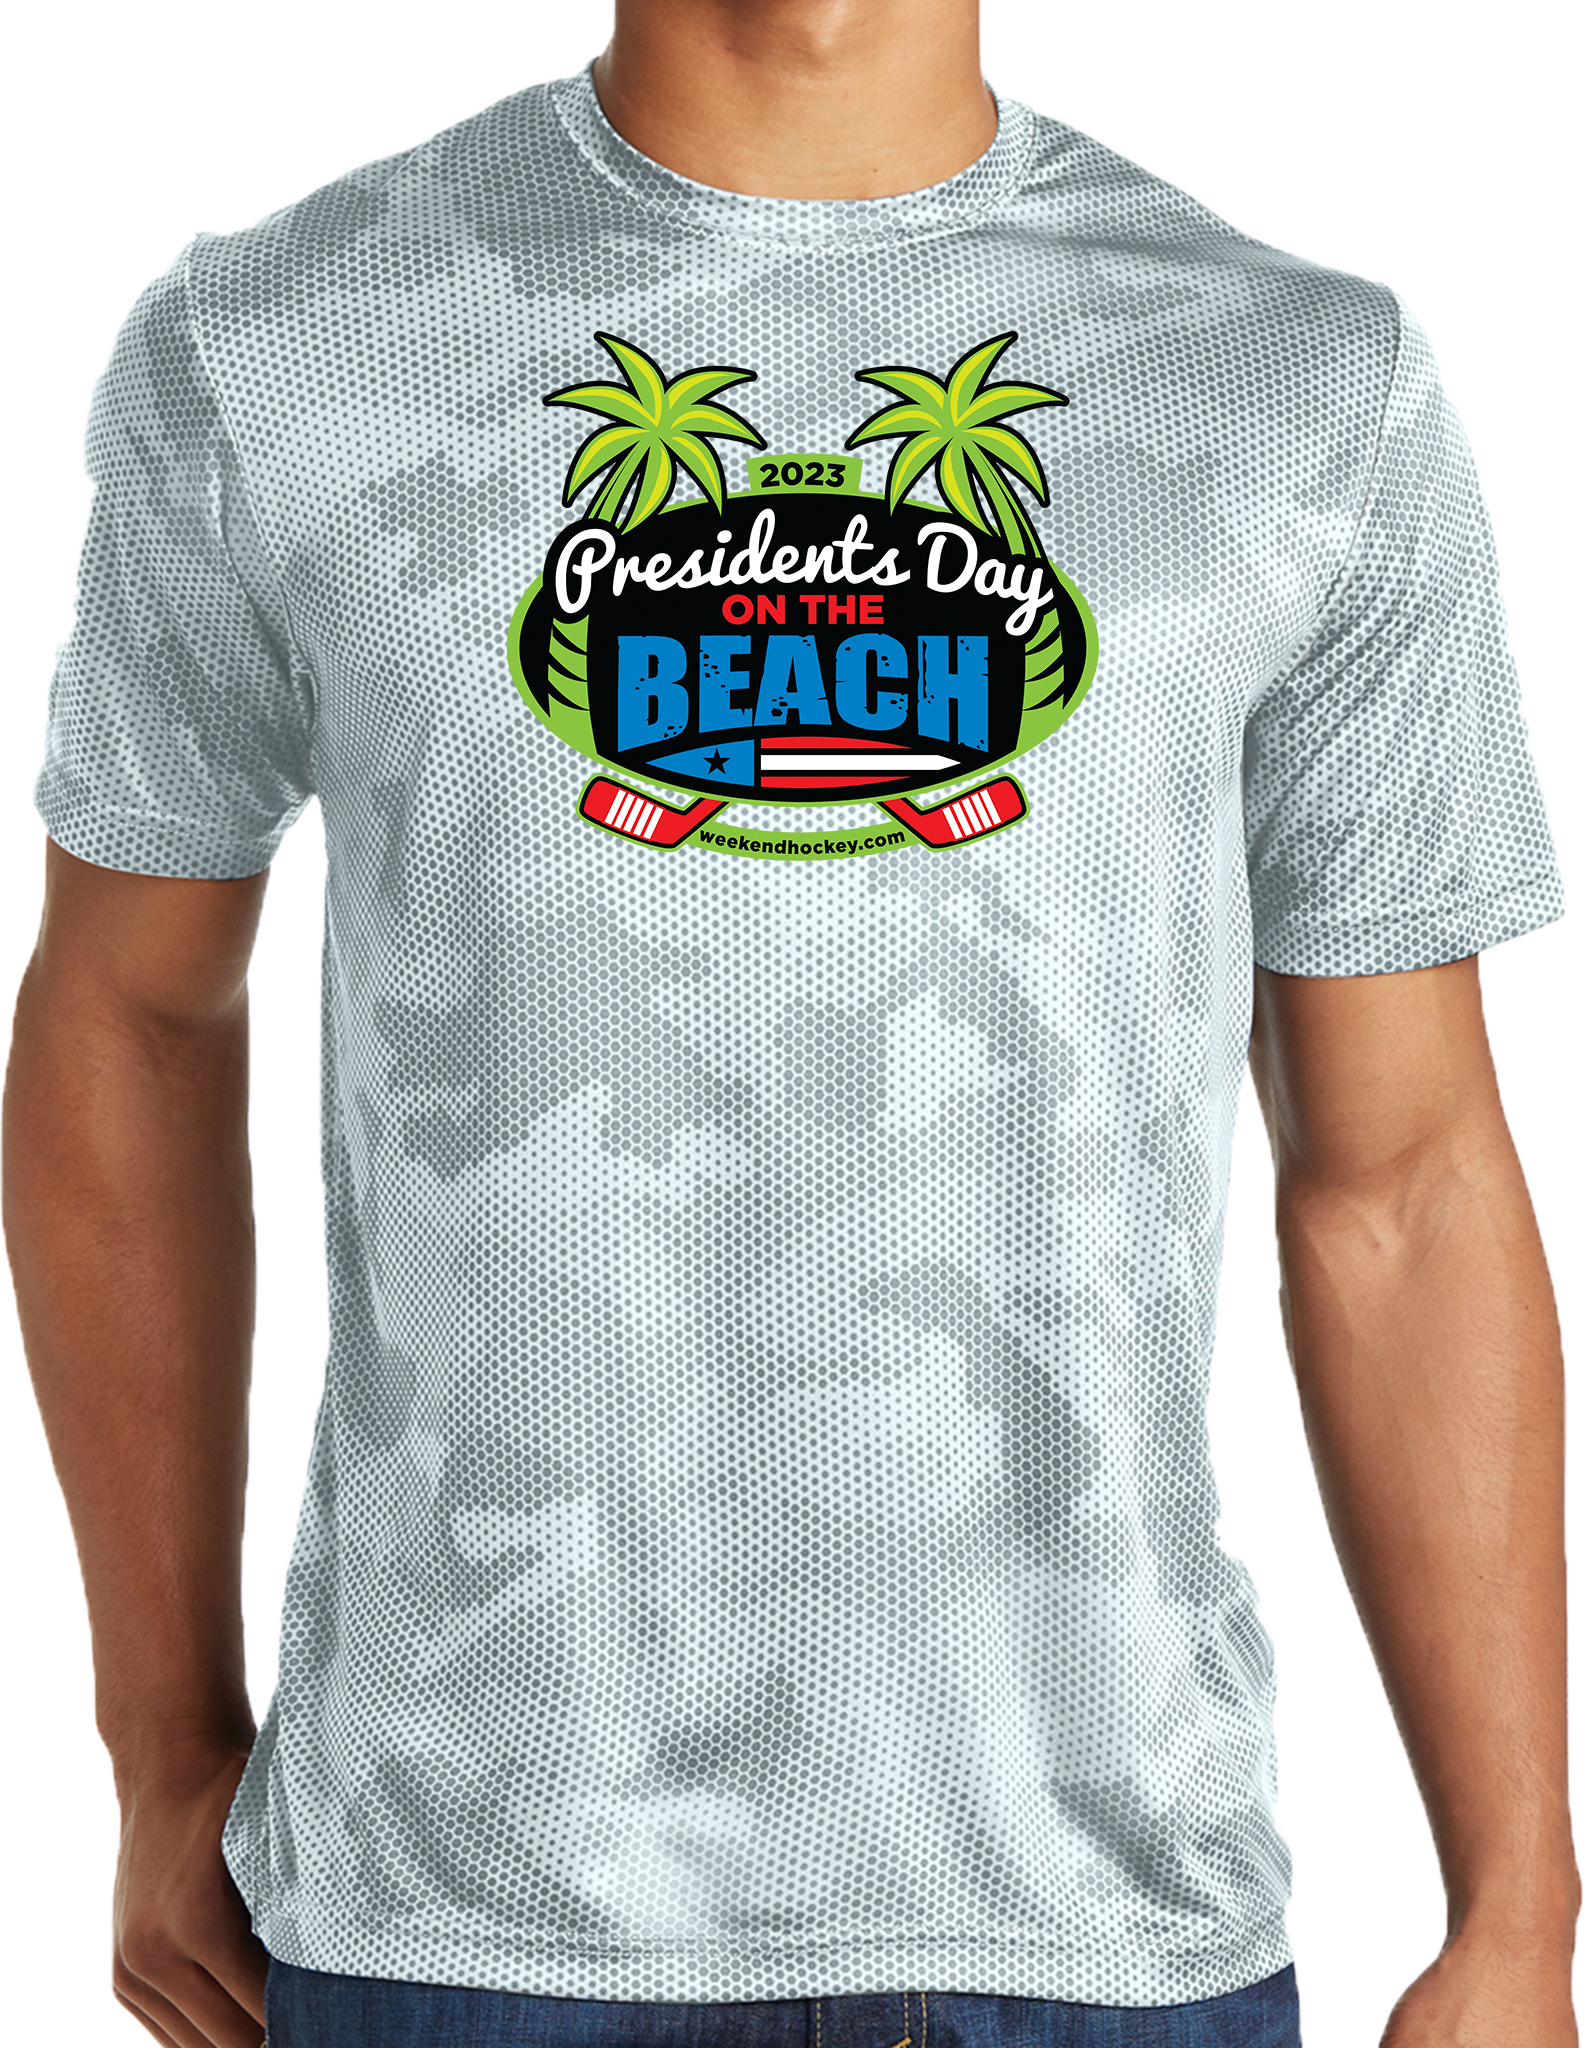 PERFORMANCE SHIRTS - 2023 Presidents Day on the Beach